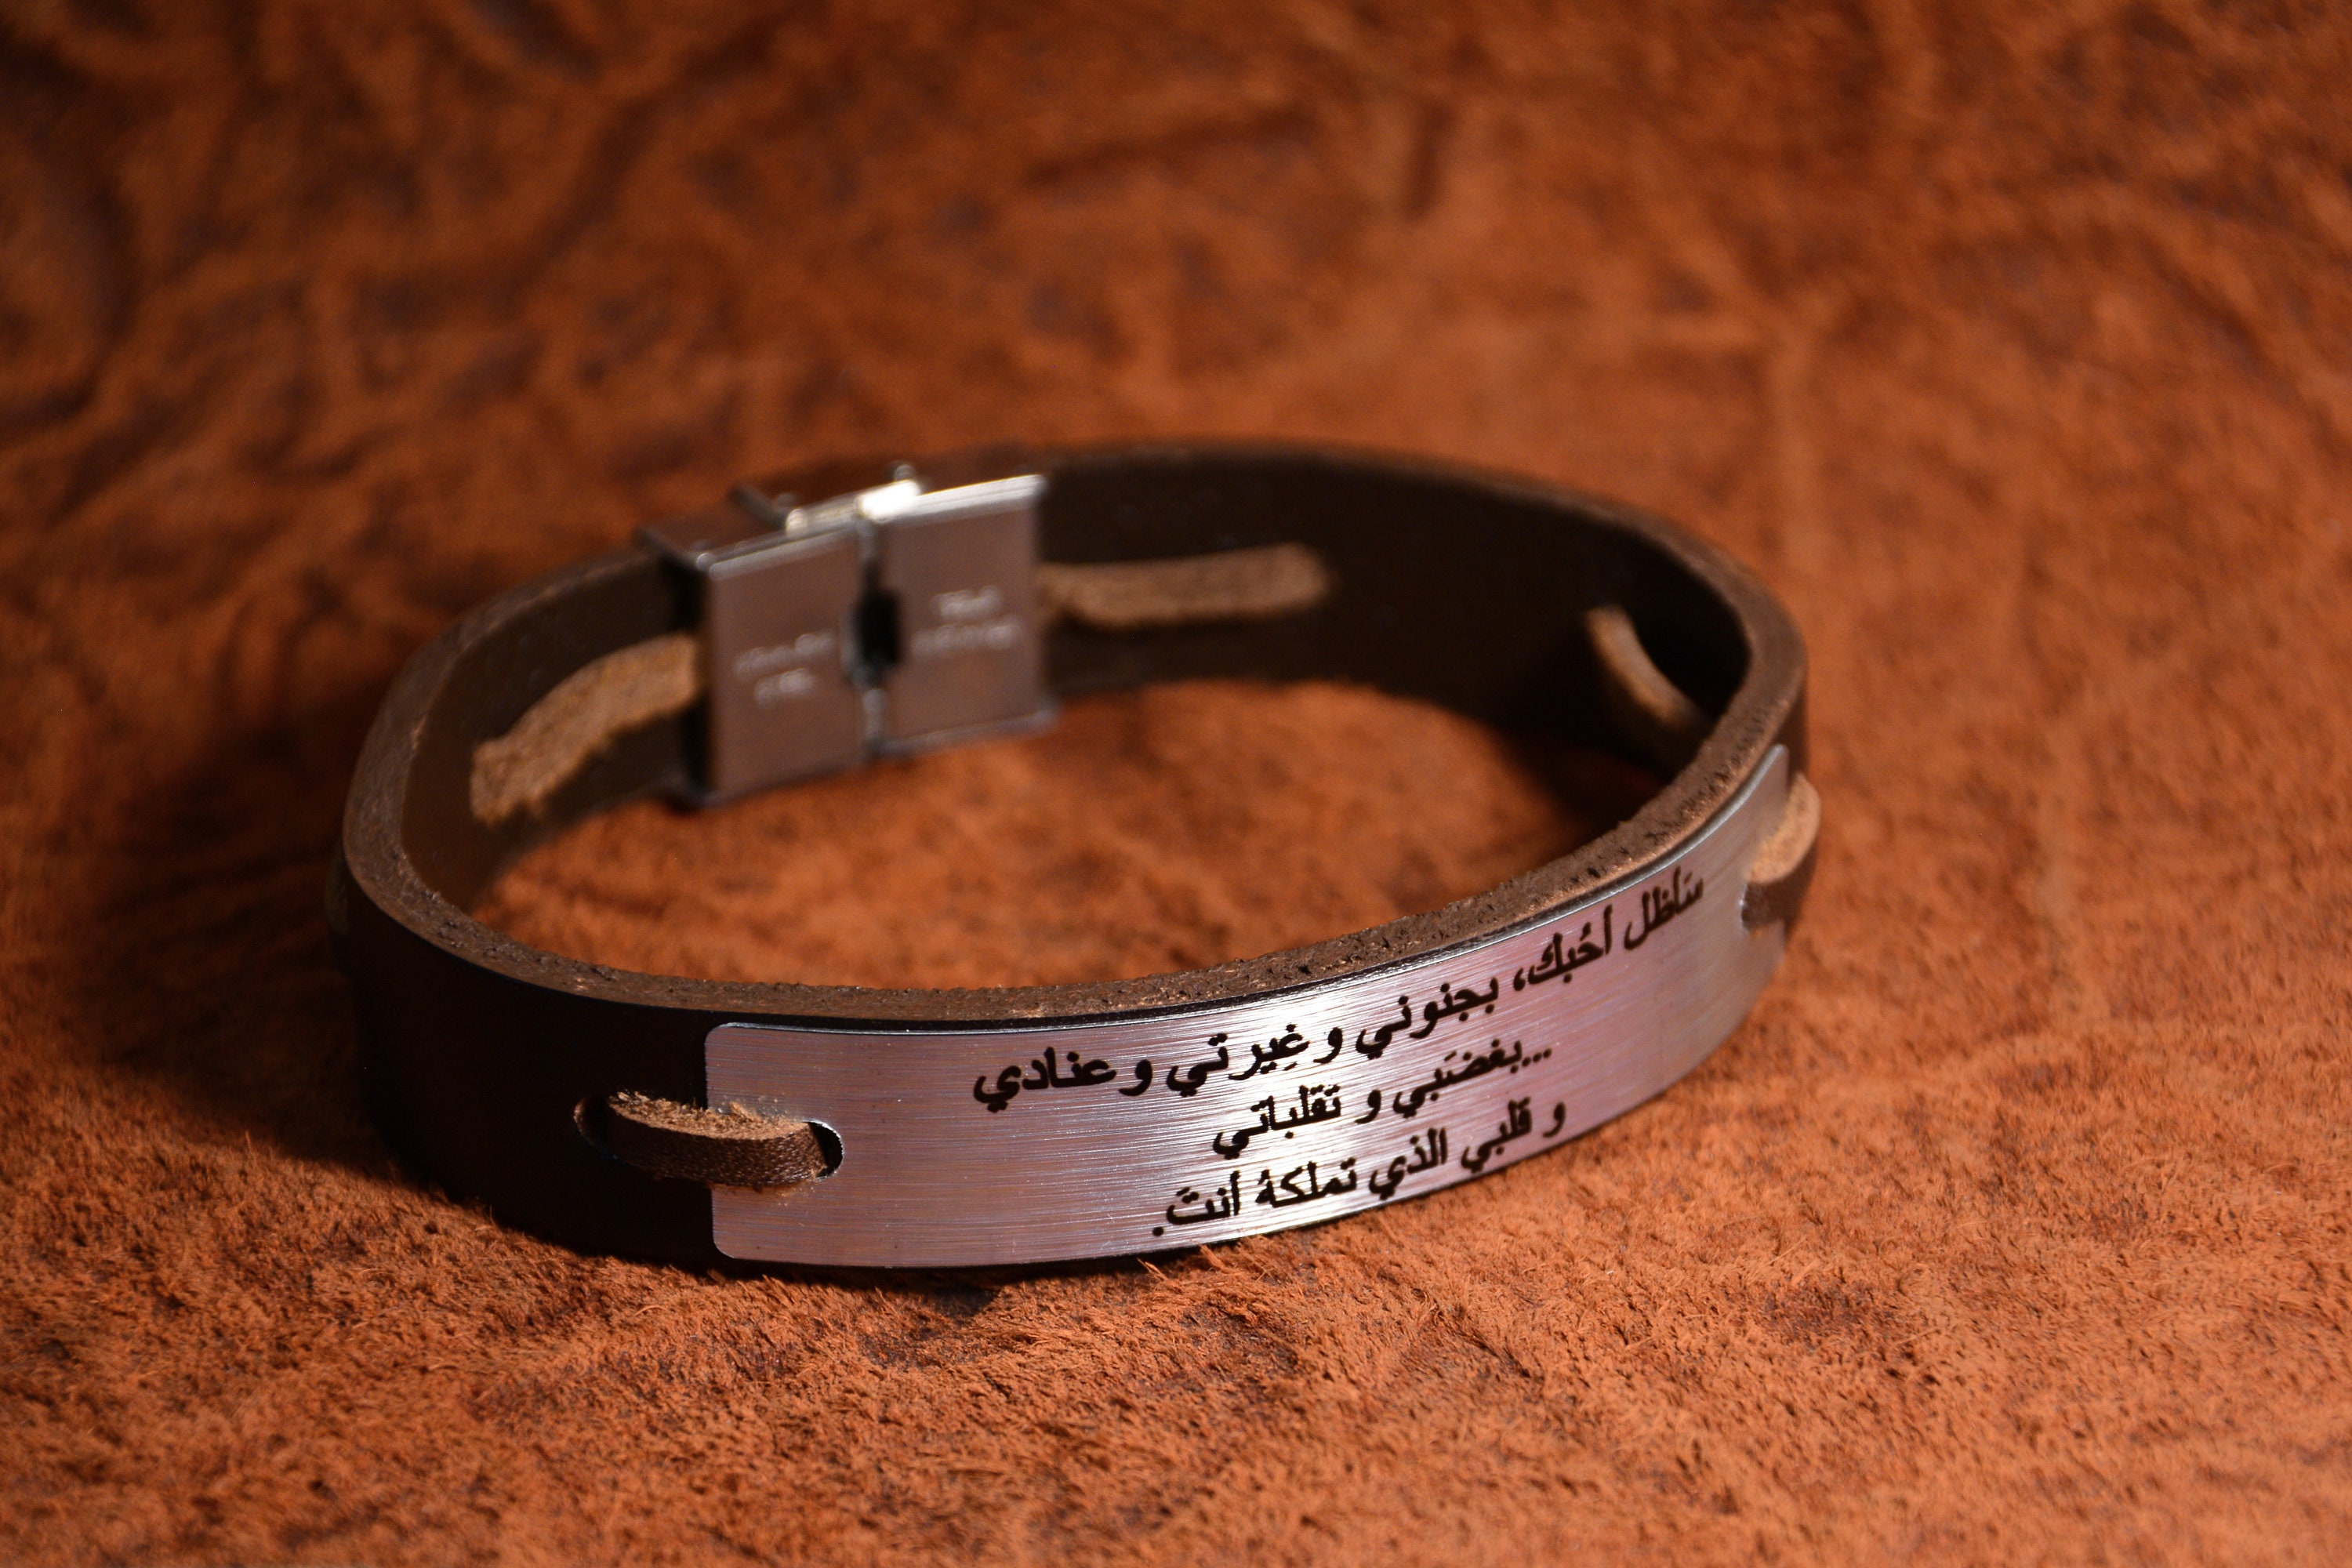 Kcaco Customized Letter Name Bracelet Personalized Arabic Adjustable Bangle  Men Stainless Steel Kids Cuff Gift 231221 From Kang05, $12.55 | DHgate.Com